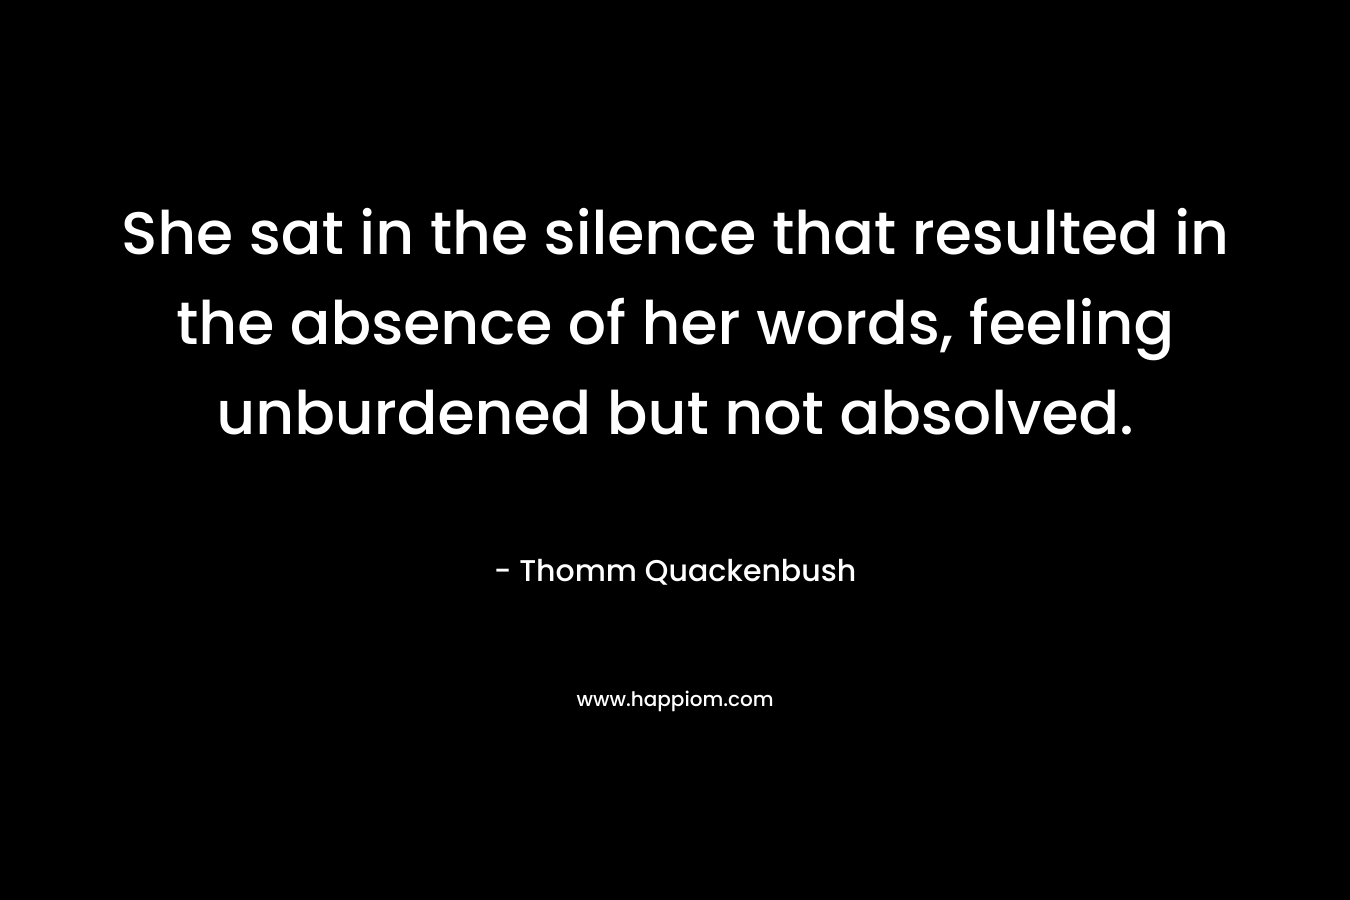 She sat in the silence that resulted in the absence of her words, feeling unburdened but not absolved.